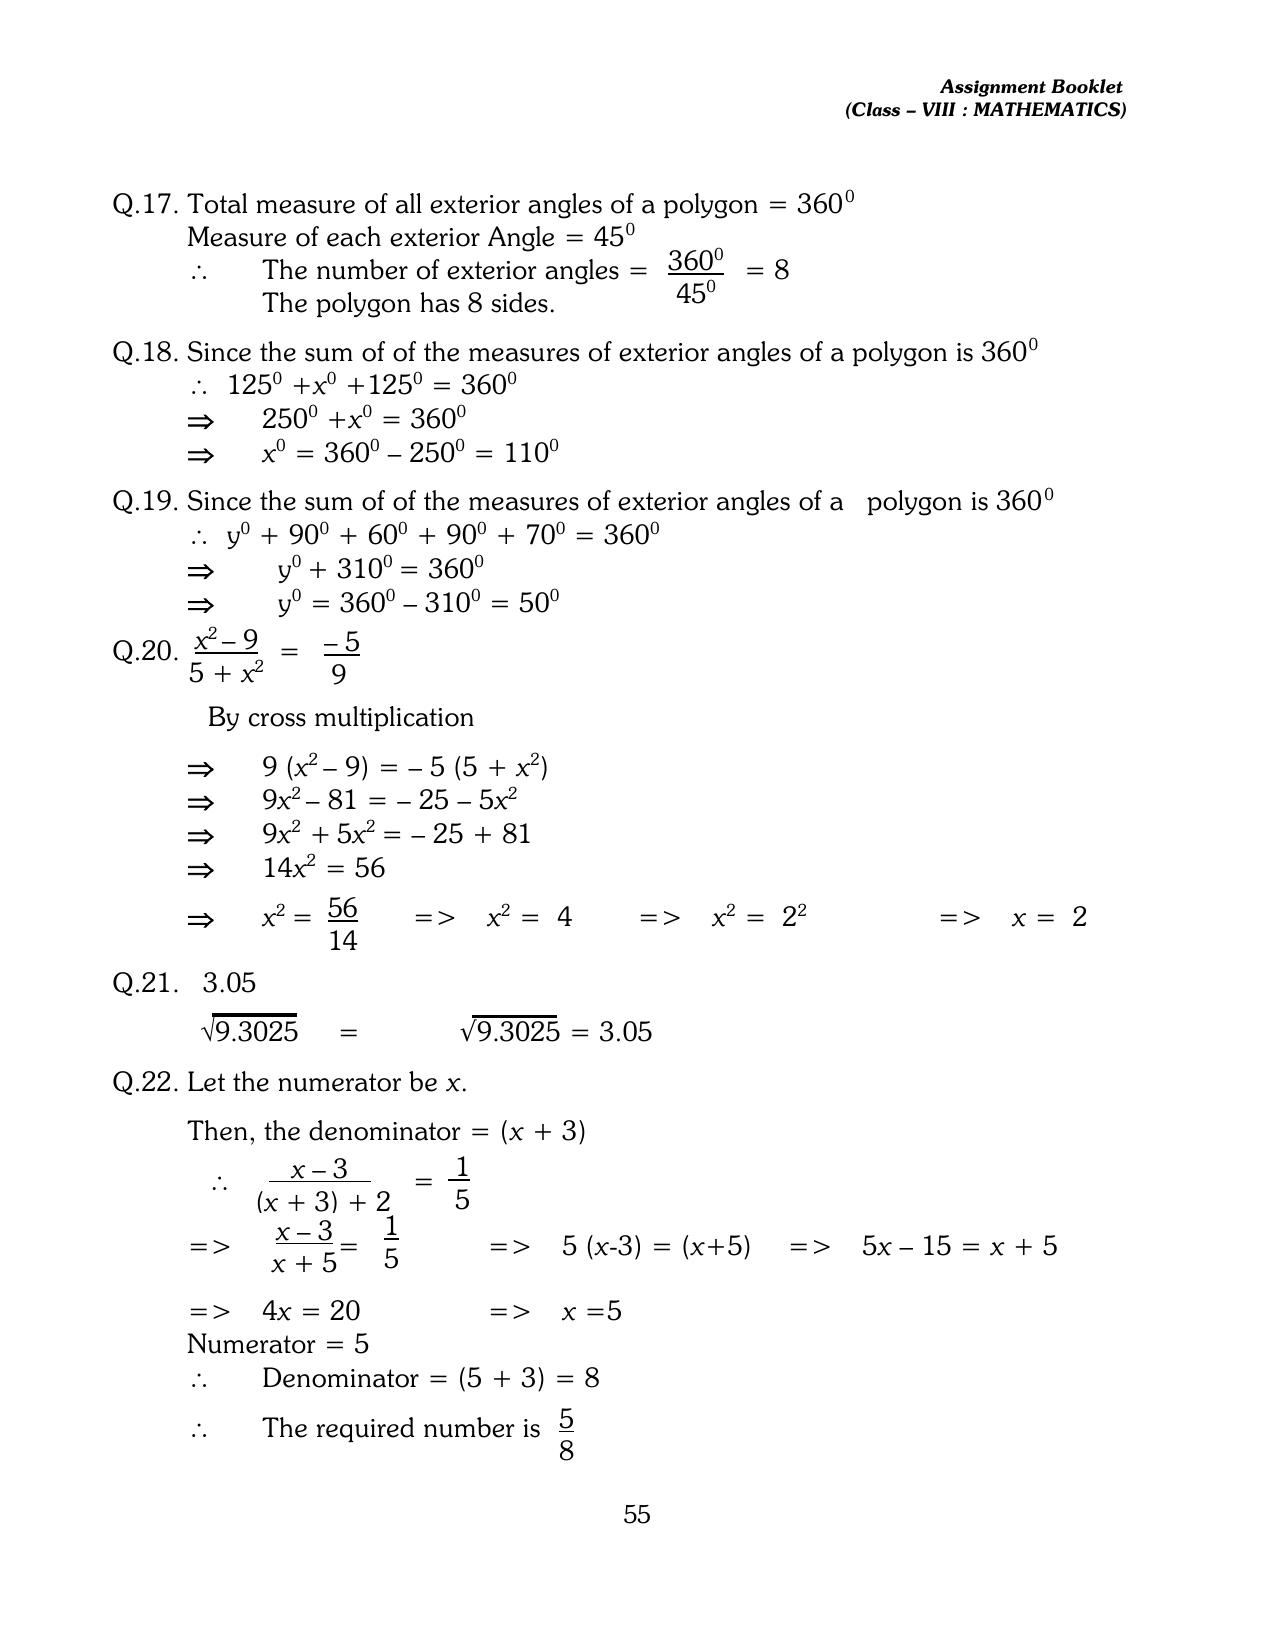 CBSE Worksheets for Class 8 Mathematics Assignment 13 - Page 45